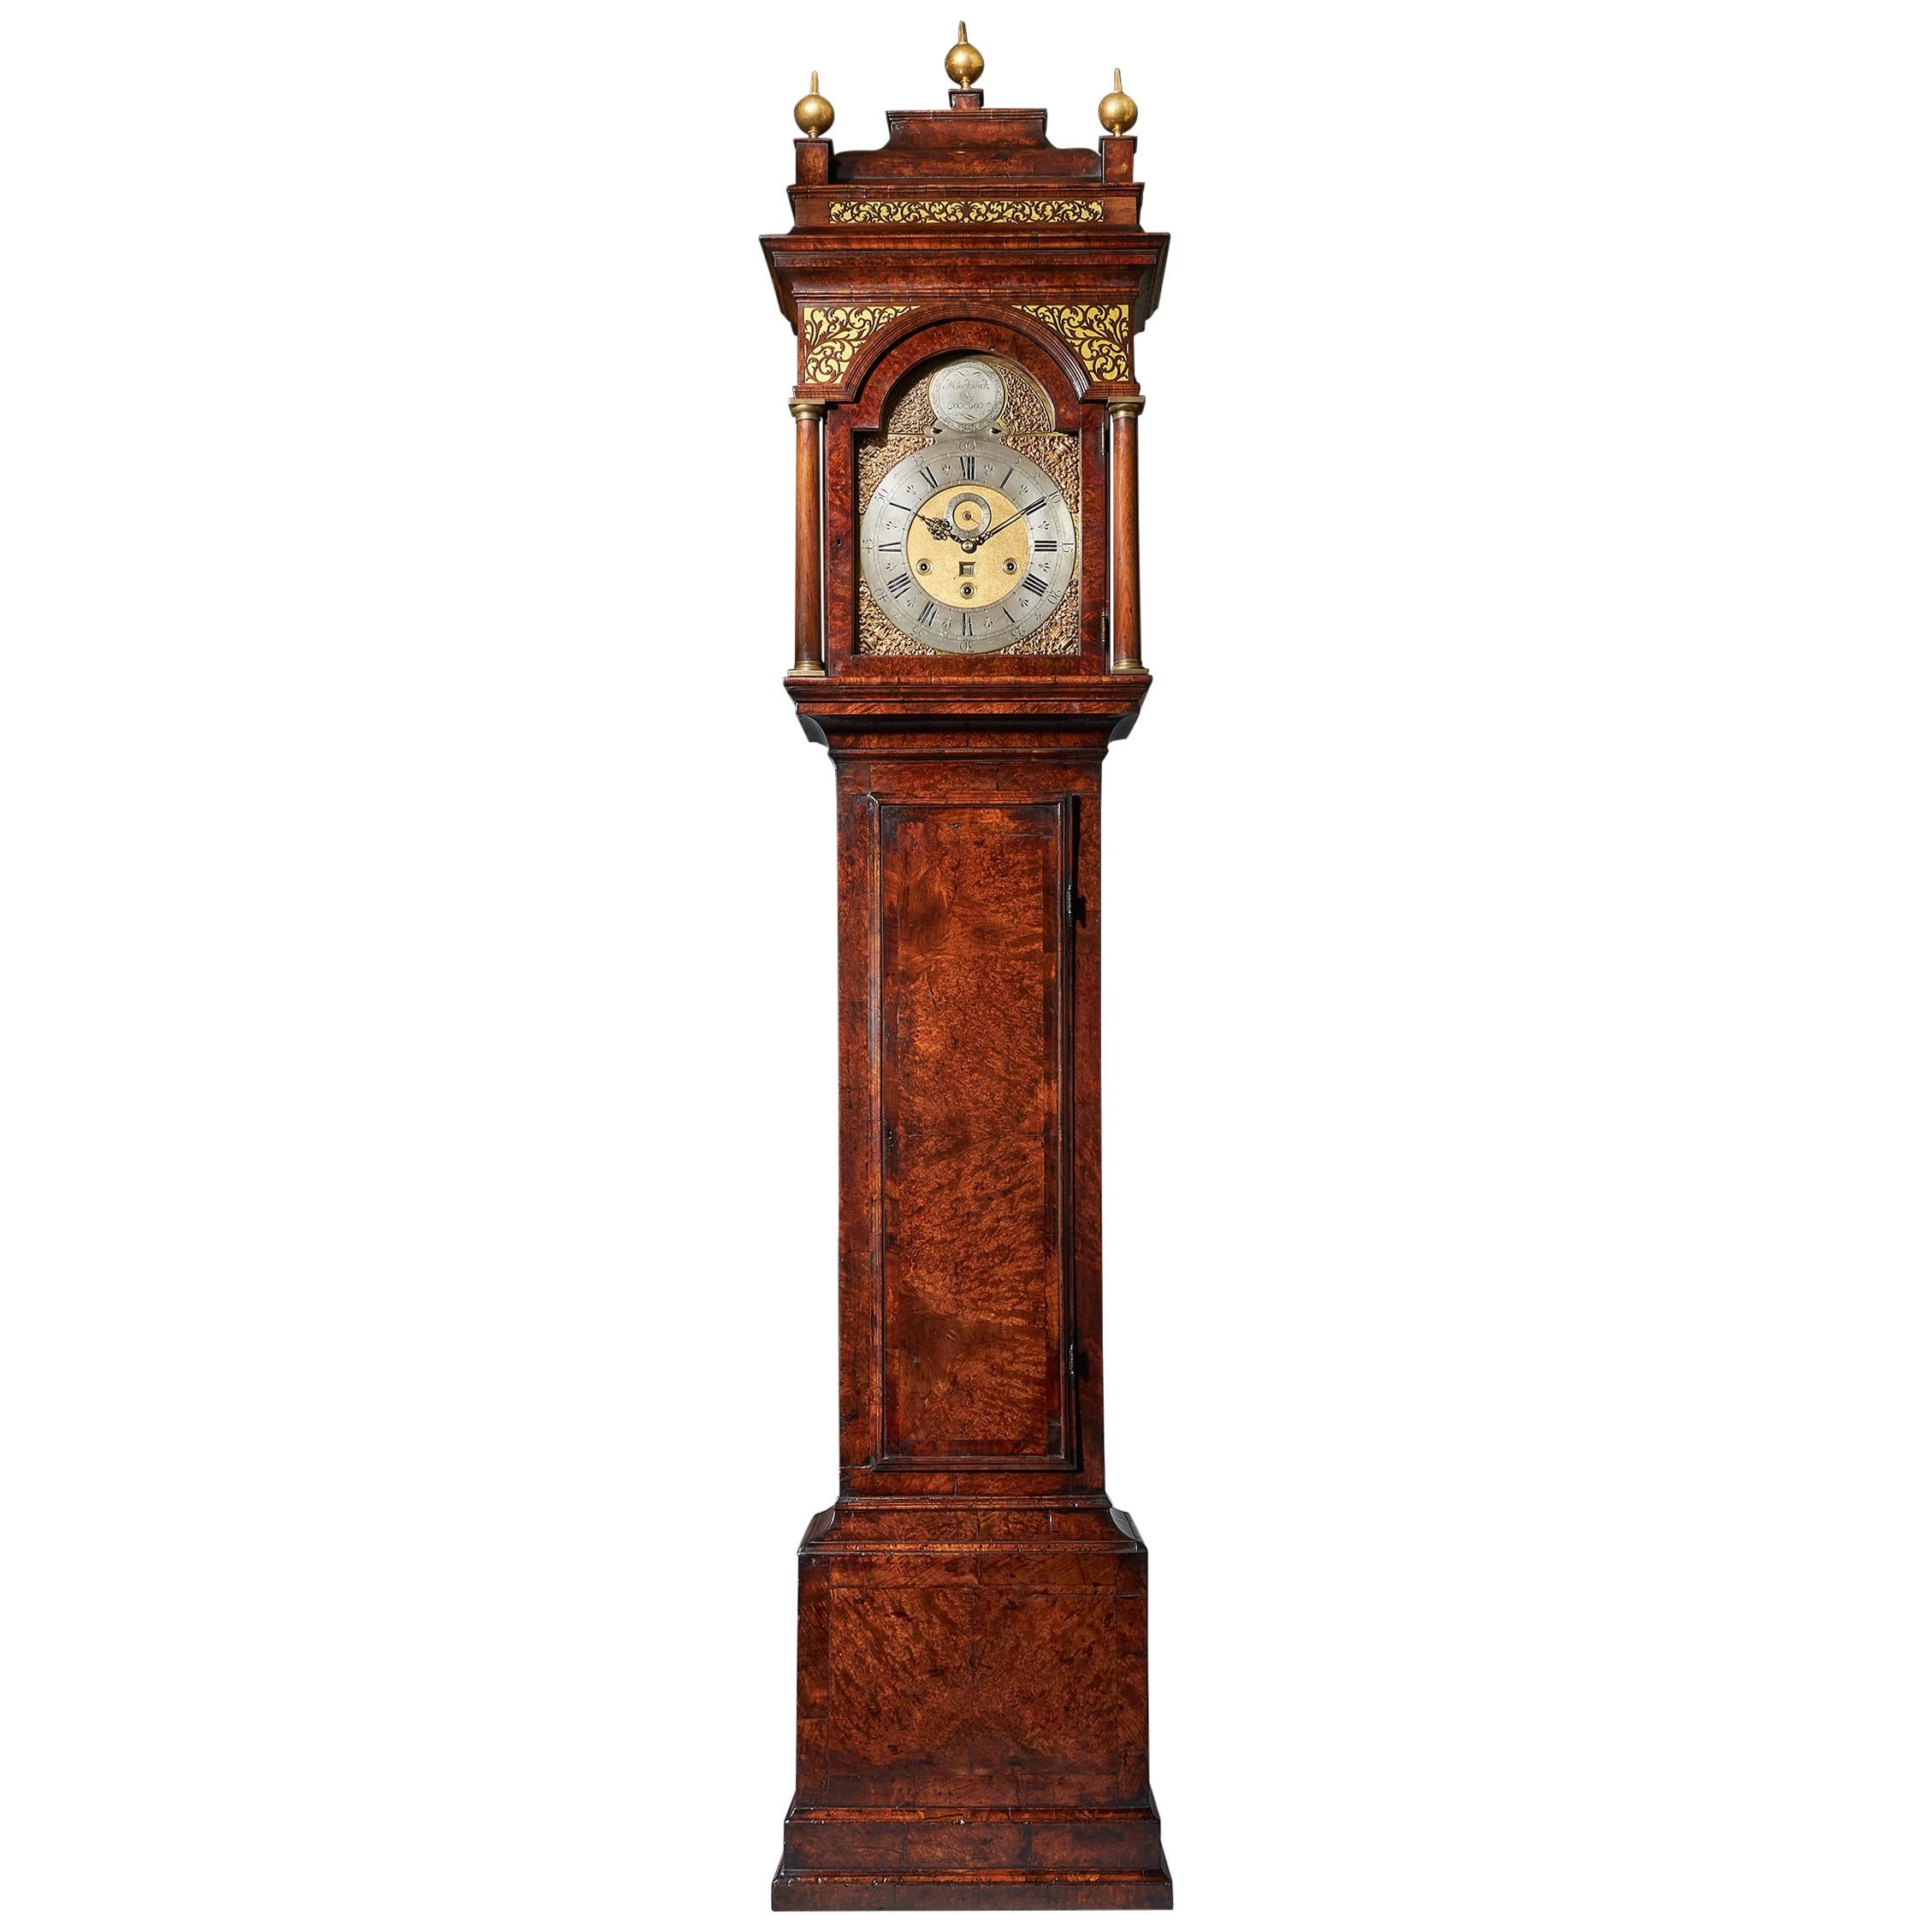 The 10.5ft 18th Century George I Bur/Burl Walnut Month Longcase Clock by For Sale